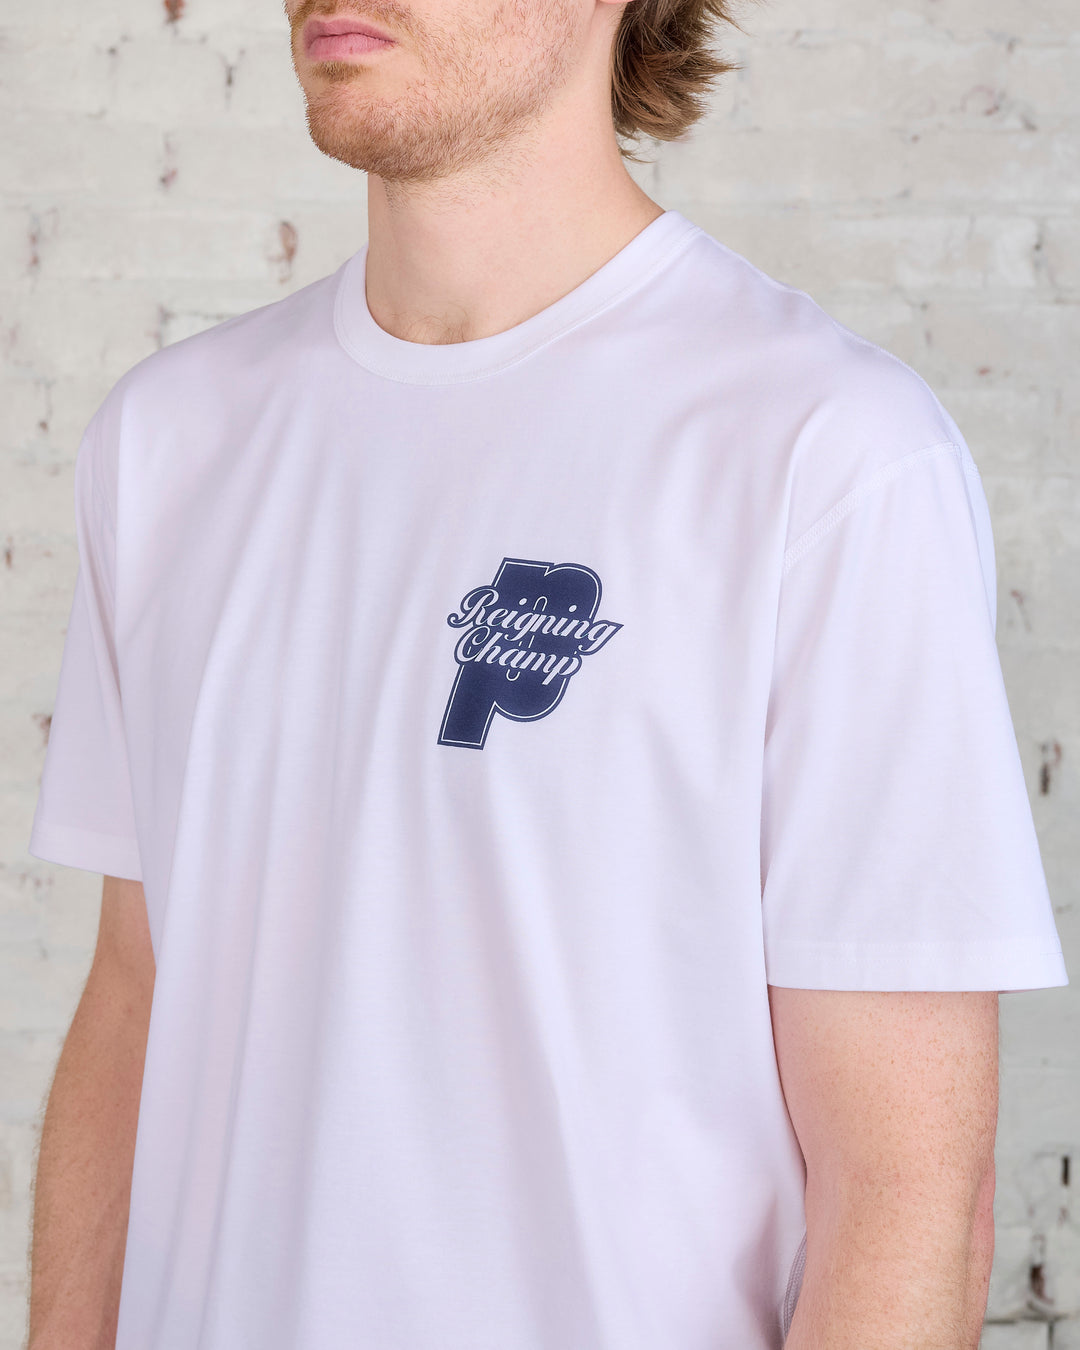 Reigning Champ x Prince Copper Jersey T-Shirt White/Navy